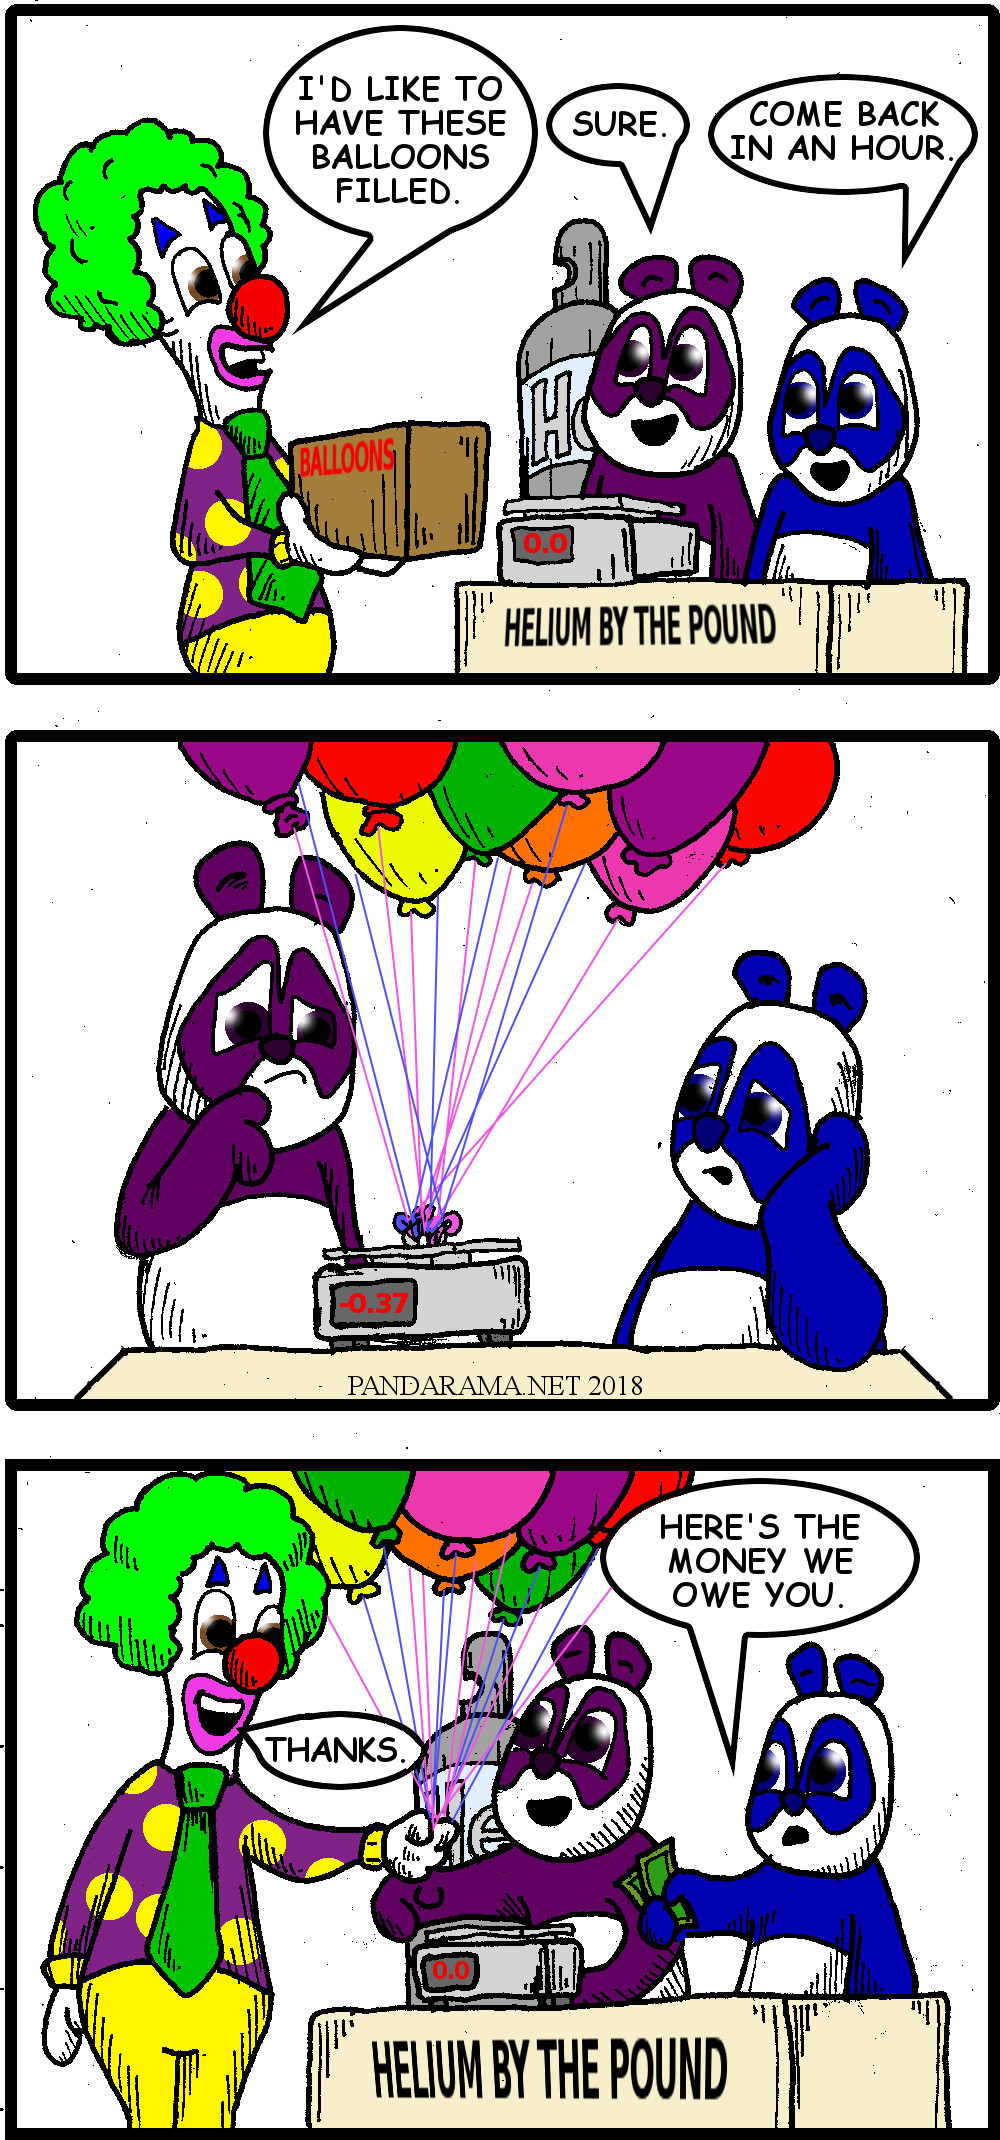 pandas lose money on balloon filling station where they sell helium by the pound.